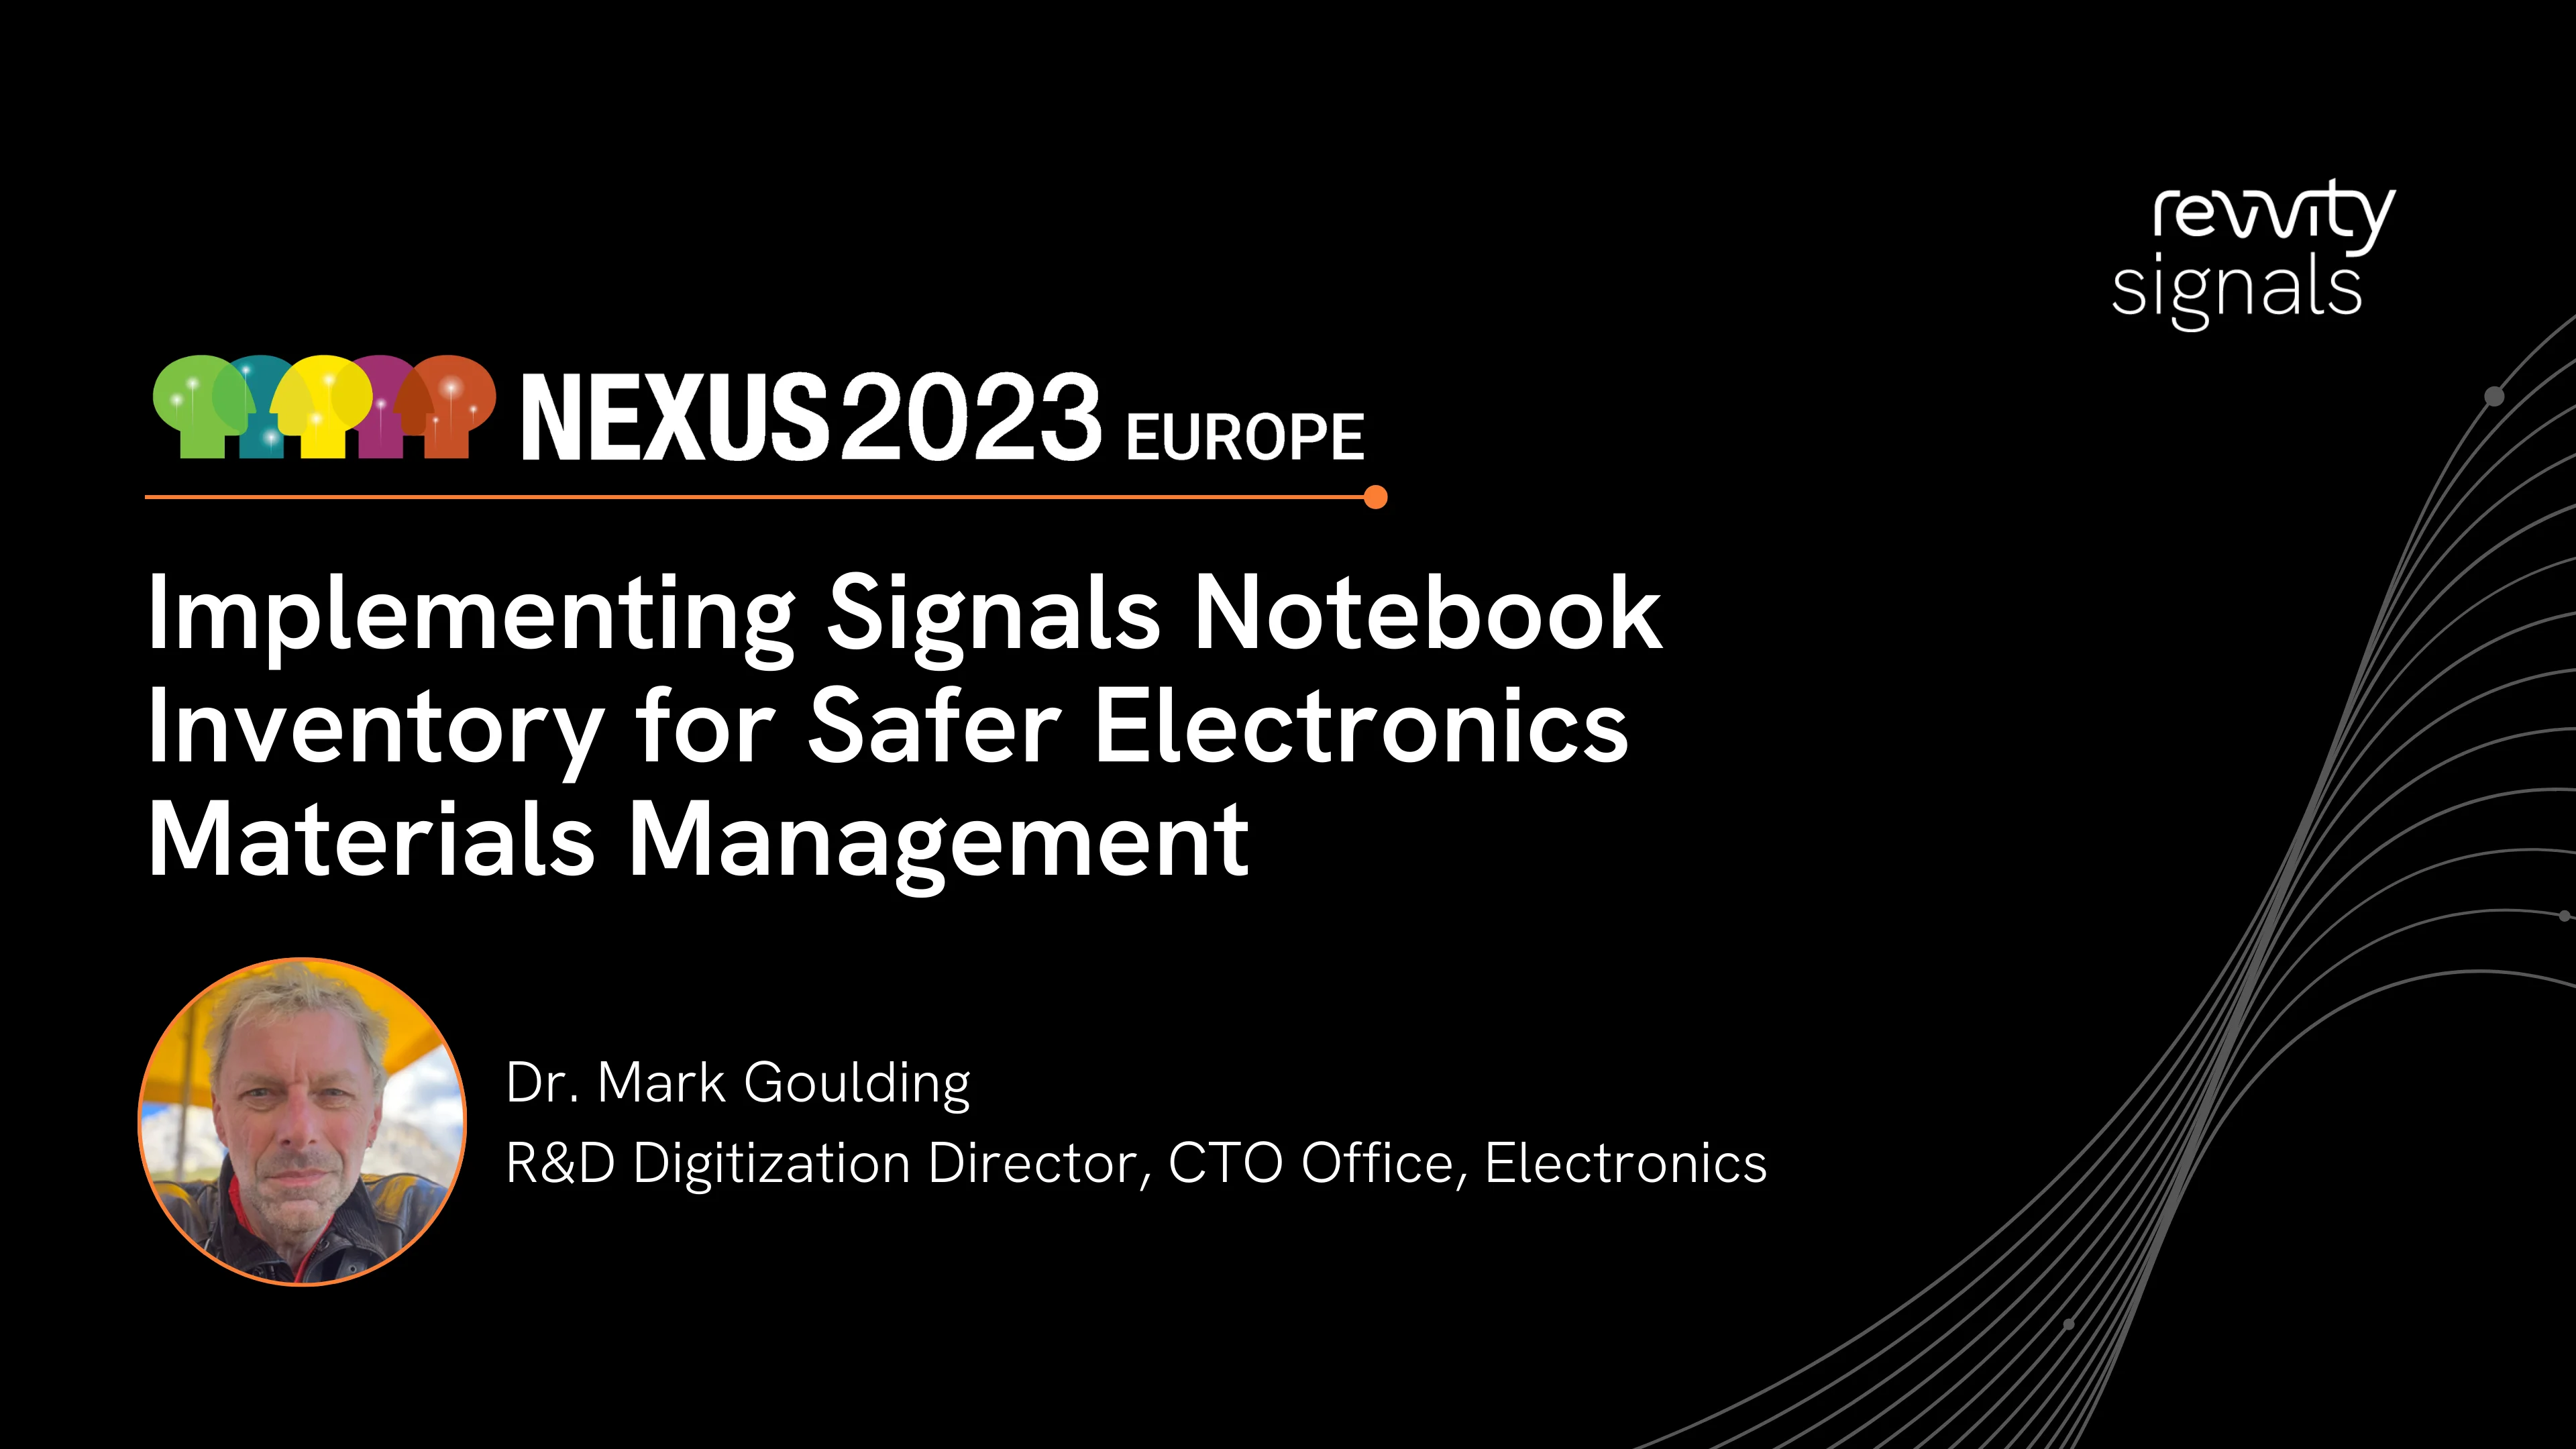 Watch Day 2, EU NEXUS 2023 - Implementing Signals Notebook Inventory for Safer Electronics Materials Management on Vimeo.